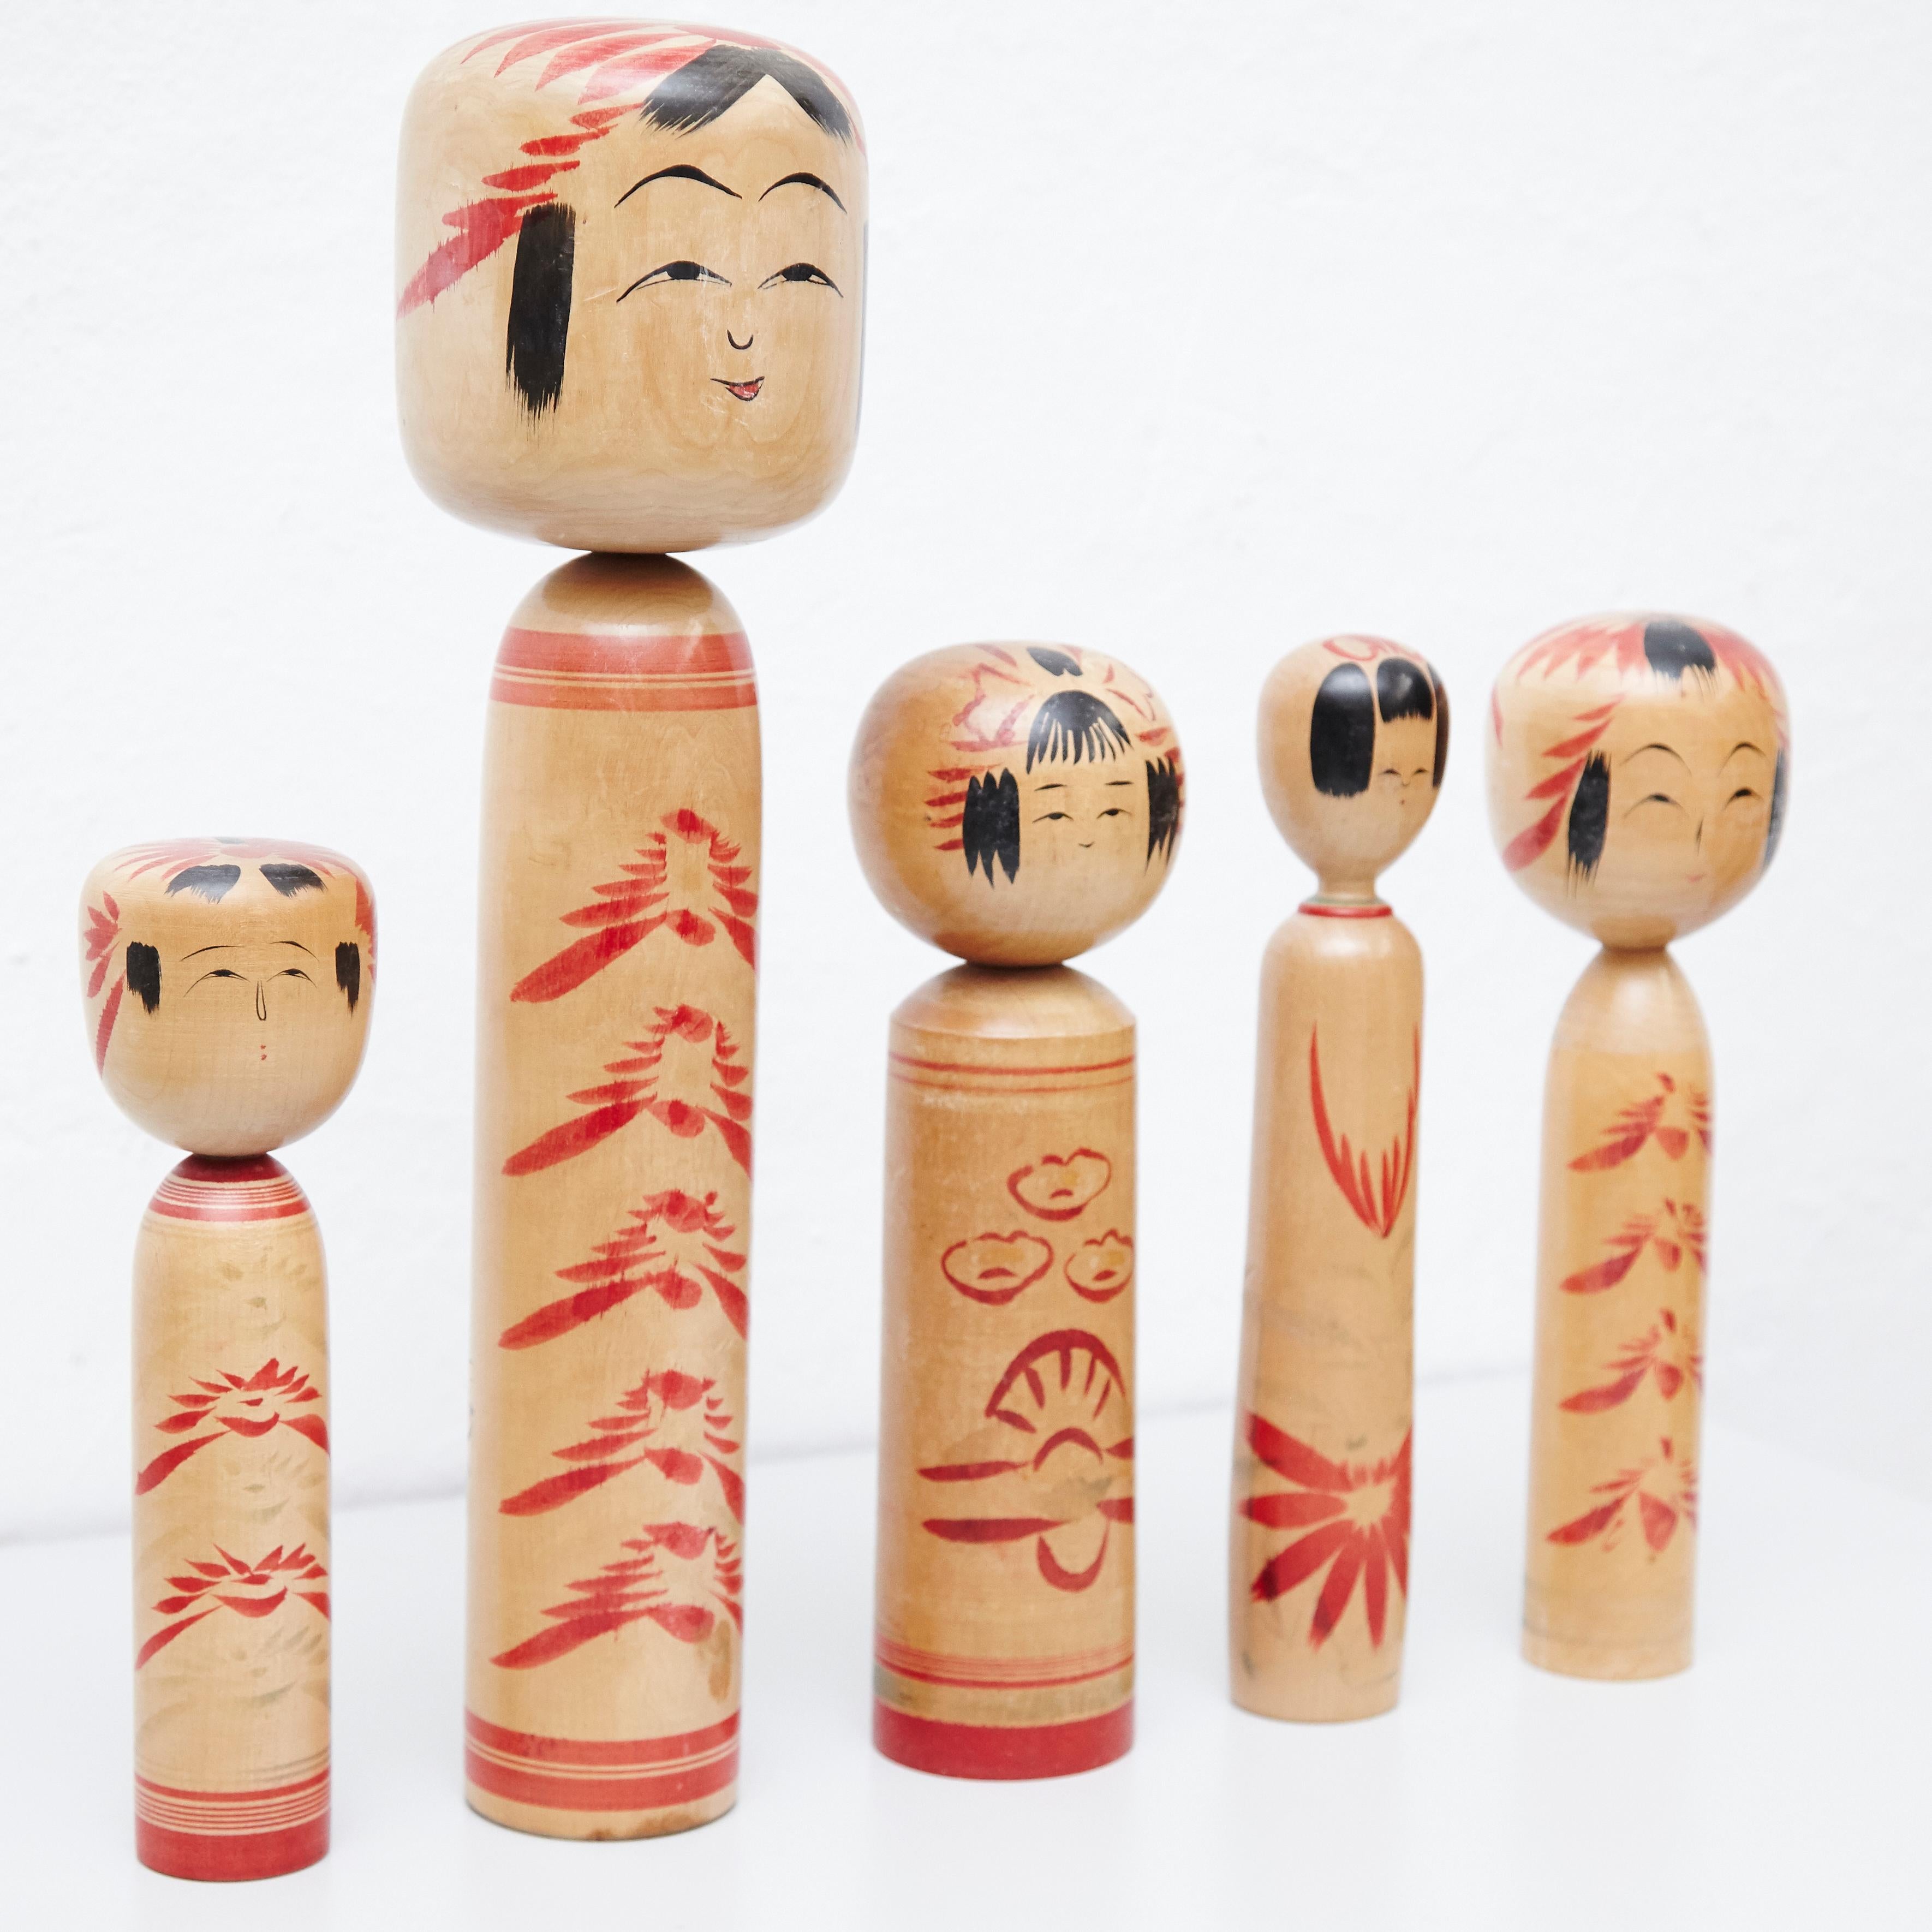 Japanese dolls called Kokeshi of the early 20th century.
Provenance from the northern Japan.
Set of 5.

Measures: 

25.5 x 7 cm
30.5 x 9 cm
30.5 x 8.5 cm
46 x 12 cm
30.5 x 5 cm


Handmade by Japanese artisants from wood. Have a simple